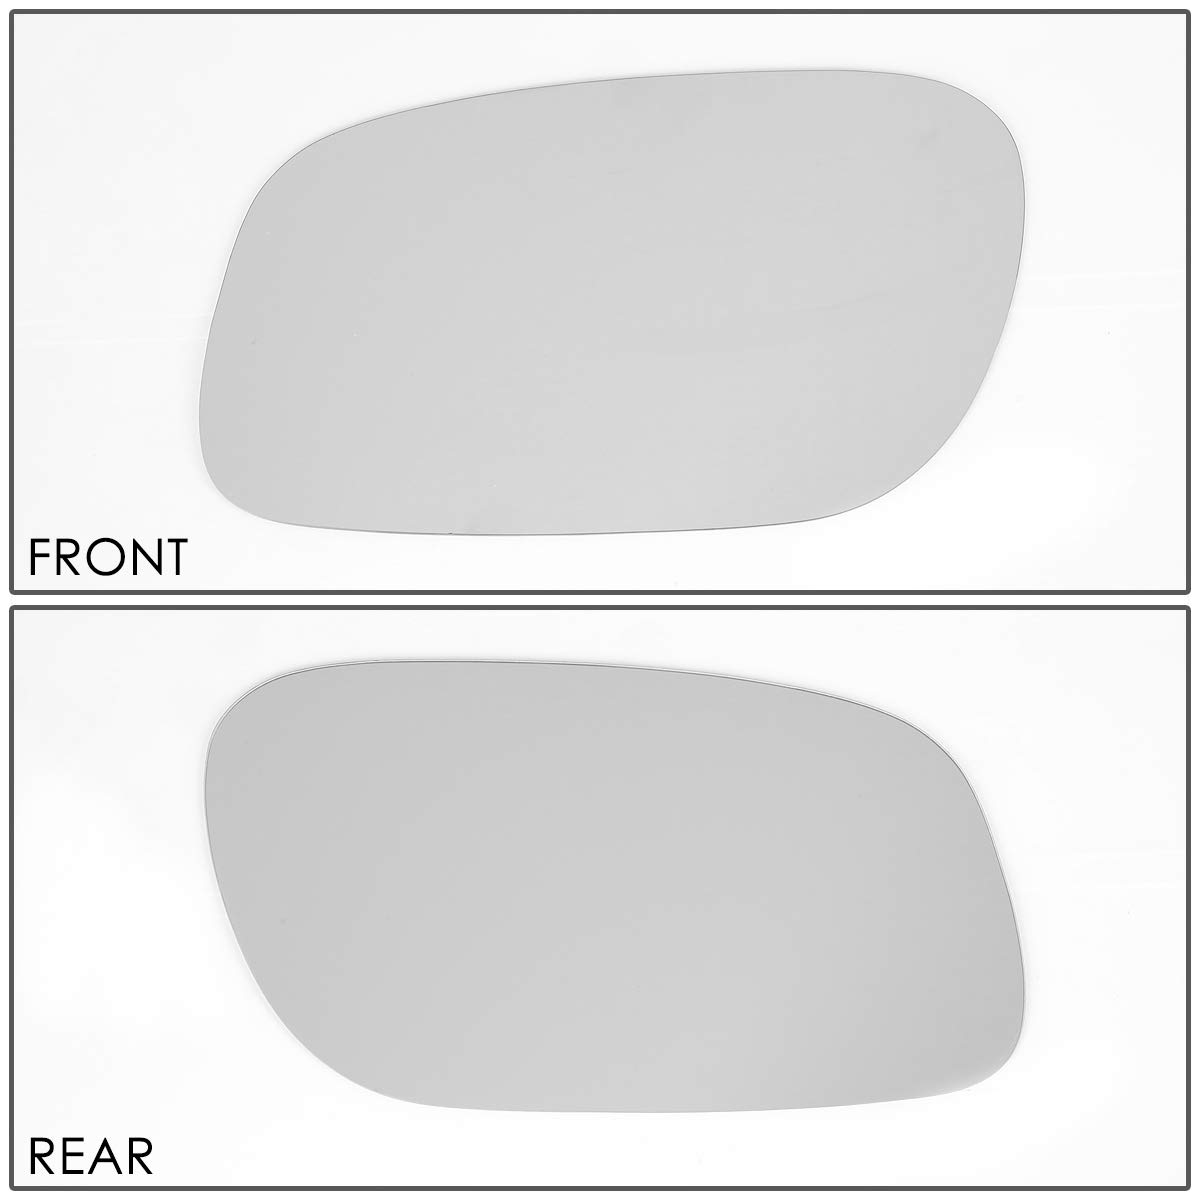 DNA MOTORING SMP-074-L Factory OE Style Left/Driver Side Door Rear View Mirror Glass Lens [Compatible with 98-11 Town Car Fits Models without Heated Mirrors]